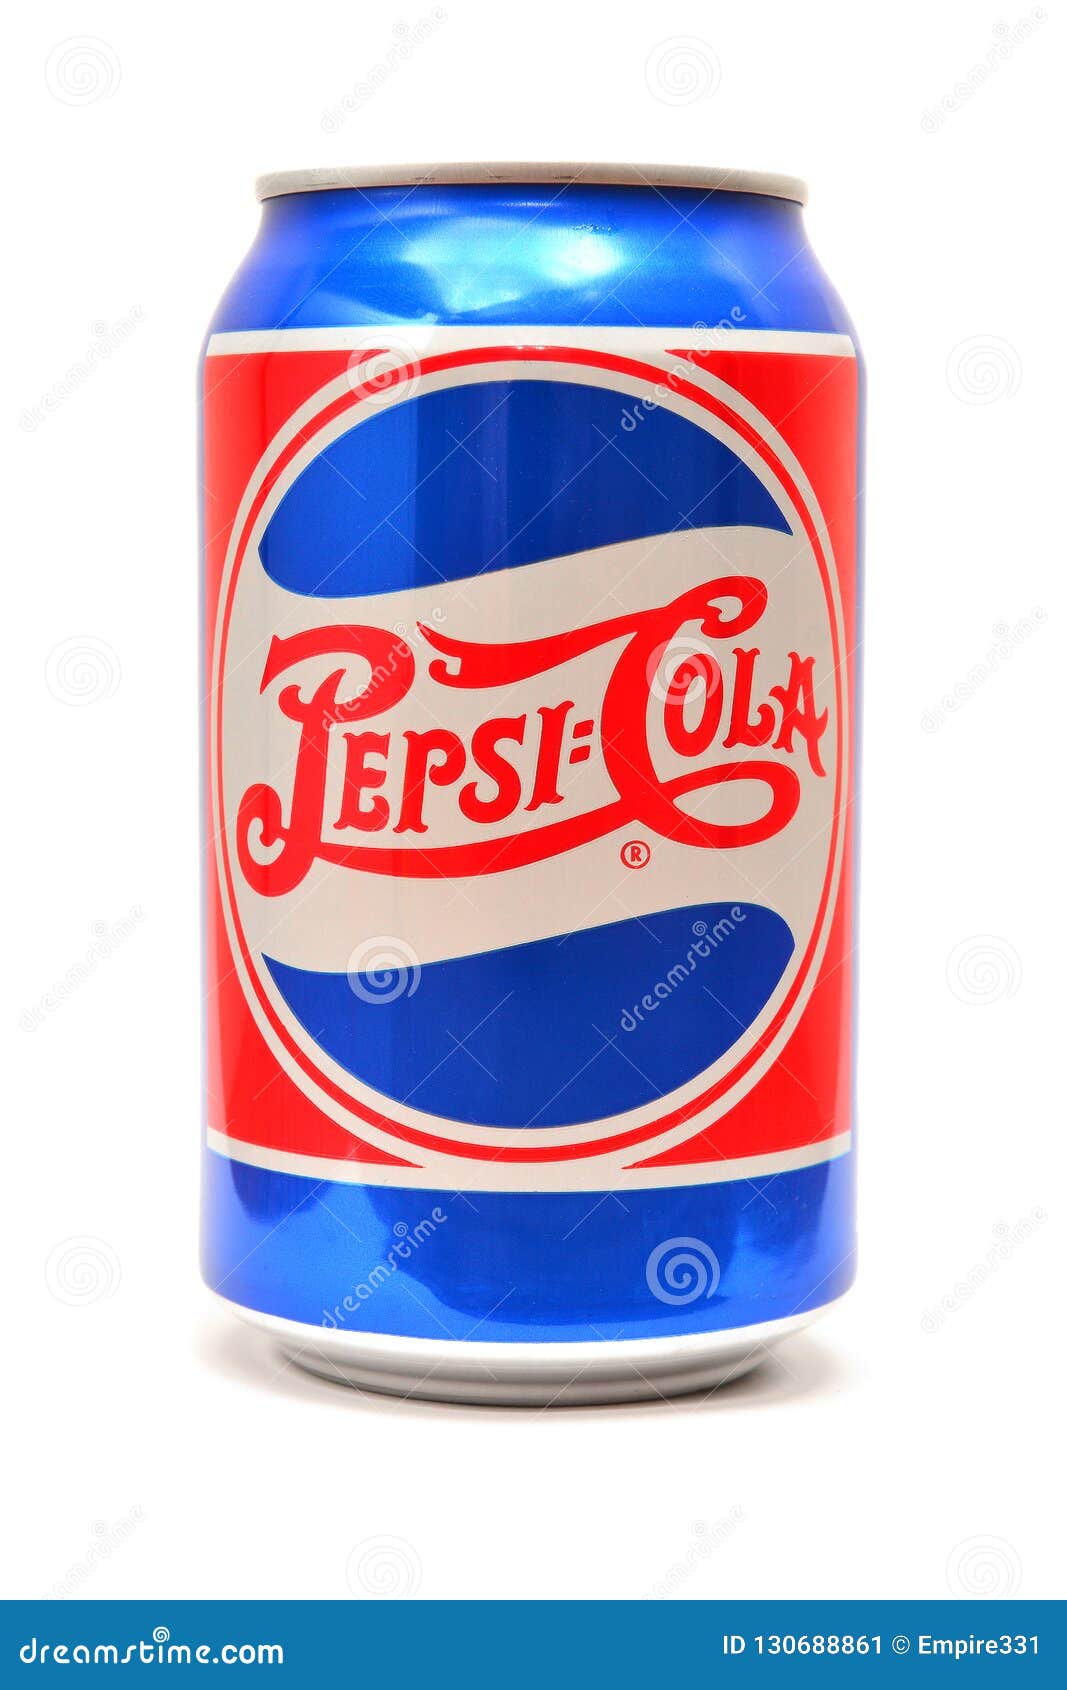 https://thumbs.dreamstime.com/z/vintage-pepsi-cola-can-caransebes-romania-october-soda-isolated-white-studio-shot-taken-th-130688861.jpg